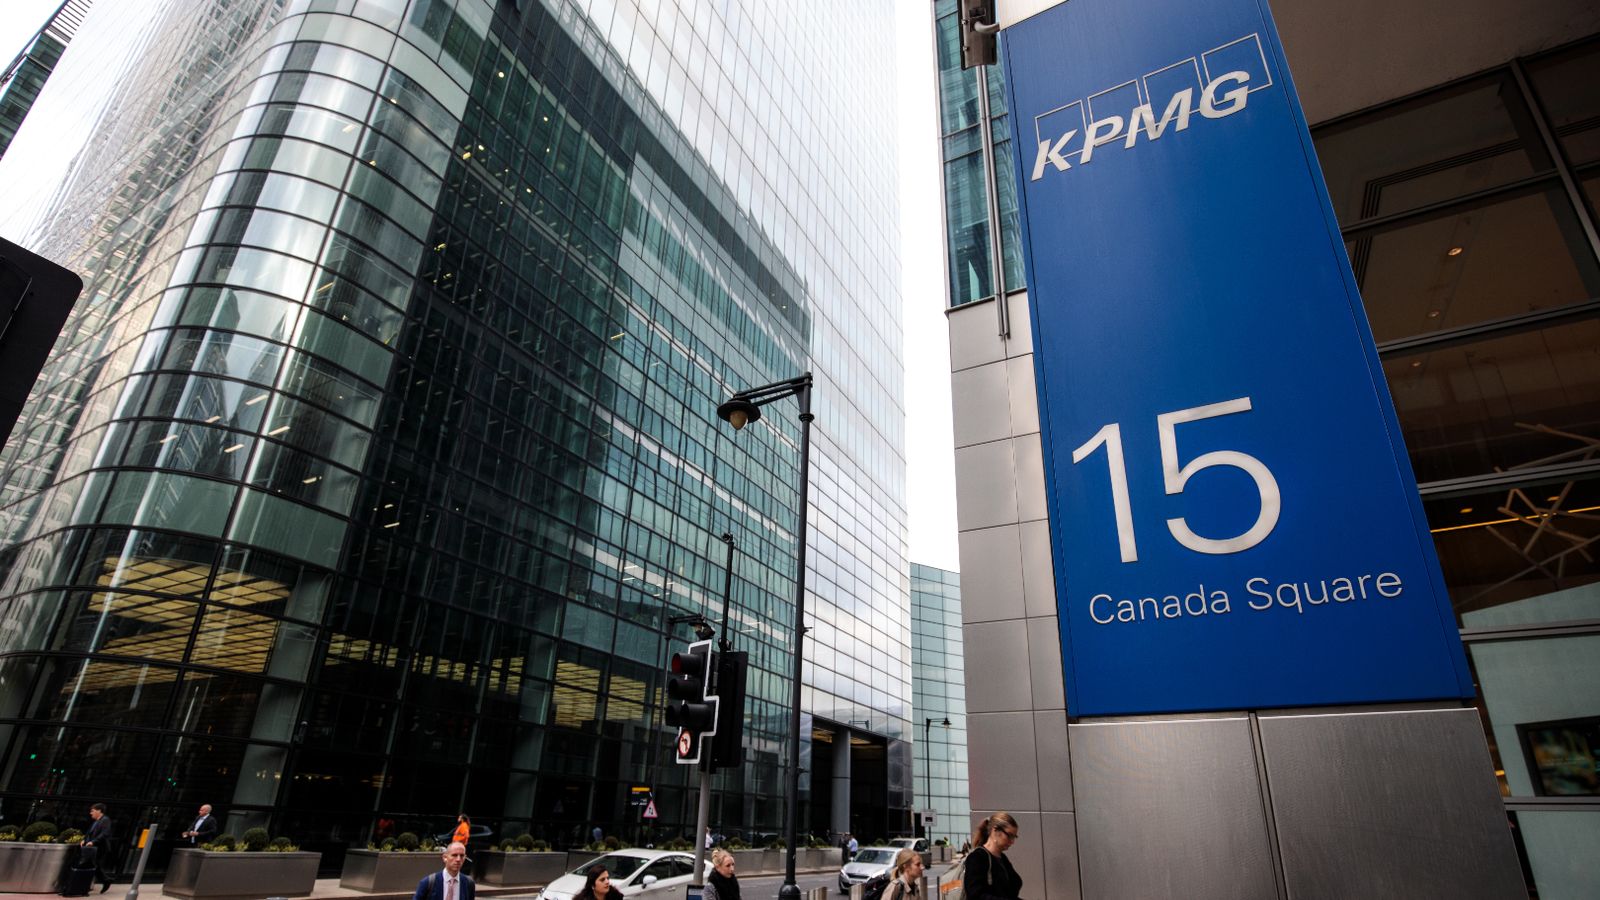 KPMG UK profit surges despite government ‘ban’ and string of scandals